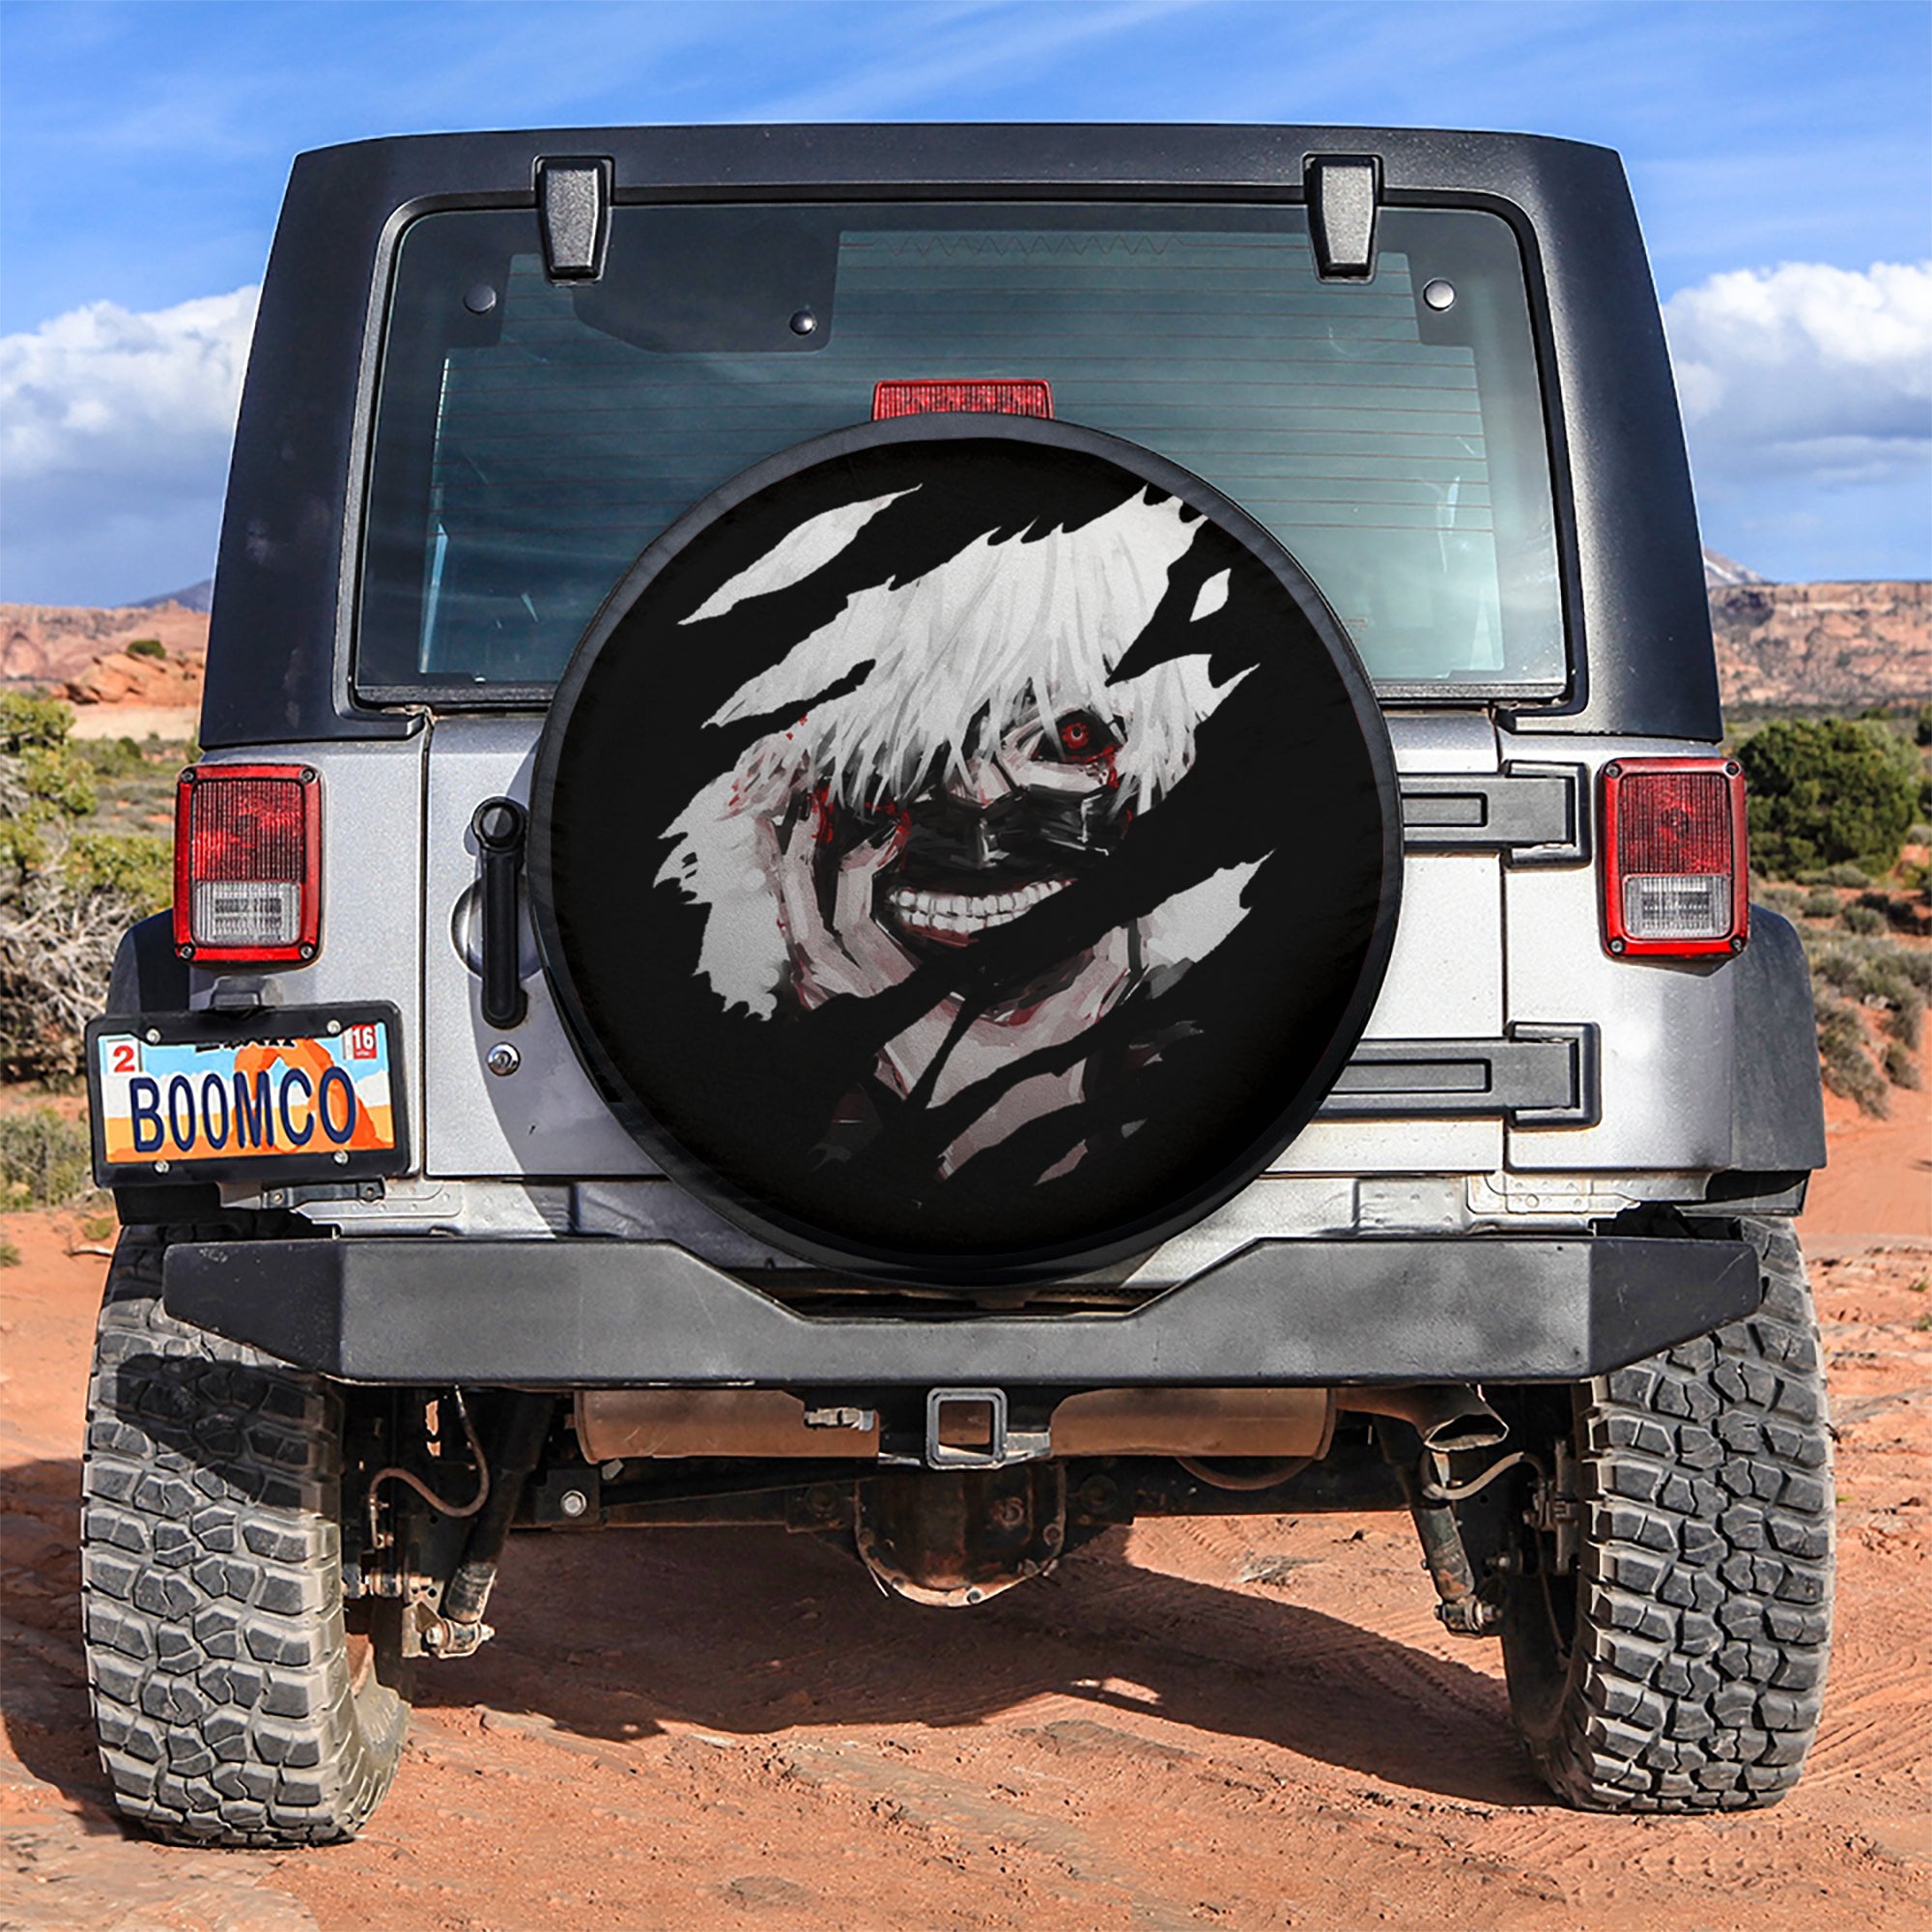 Kaneki Ken Tokyo Ghoul Anime Car Spare Tire Covers Gift For Campers Nearkii